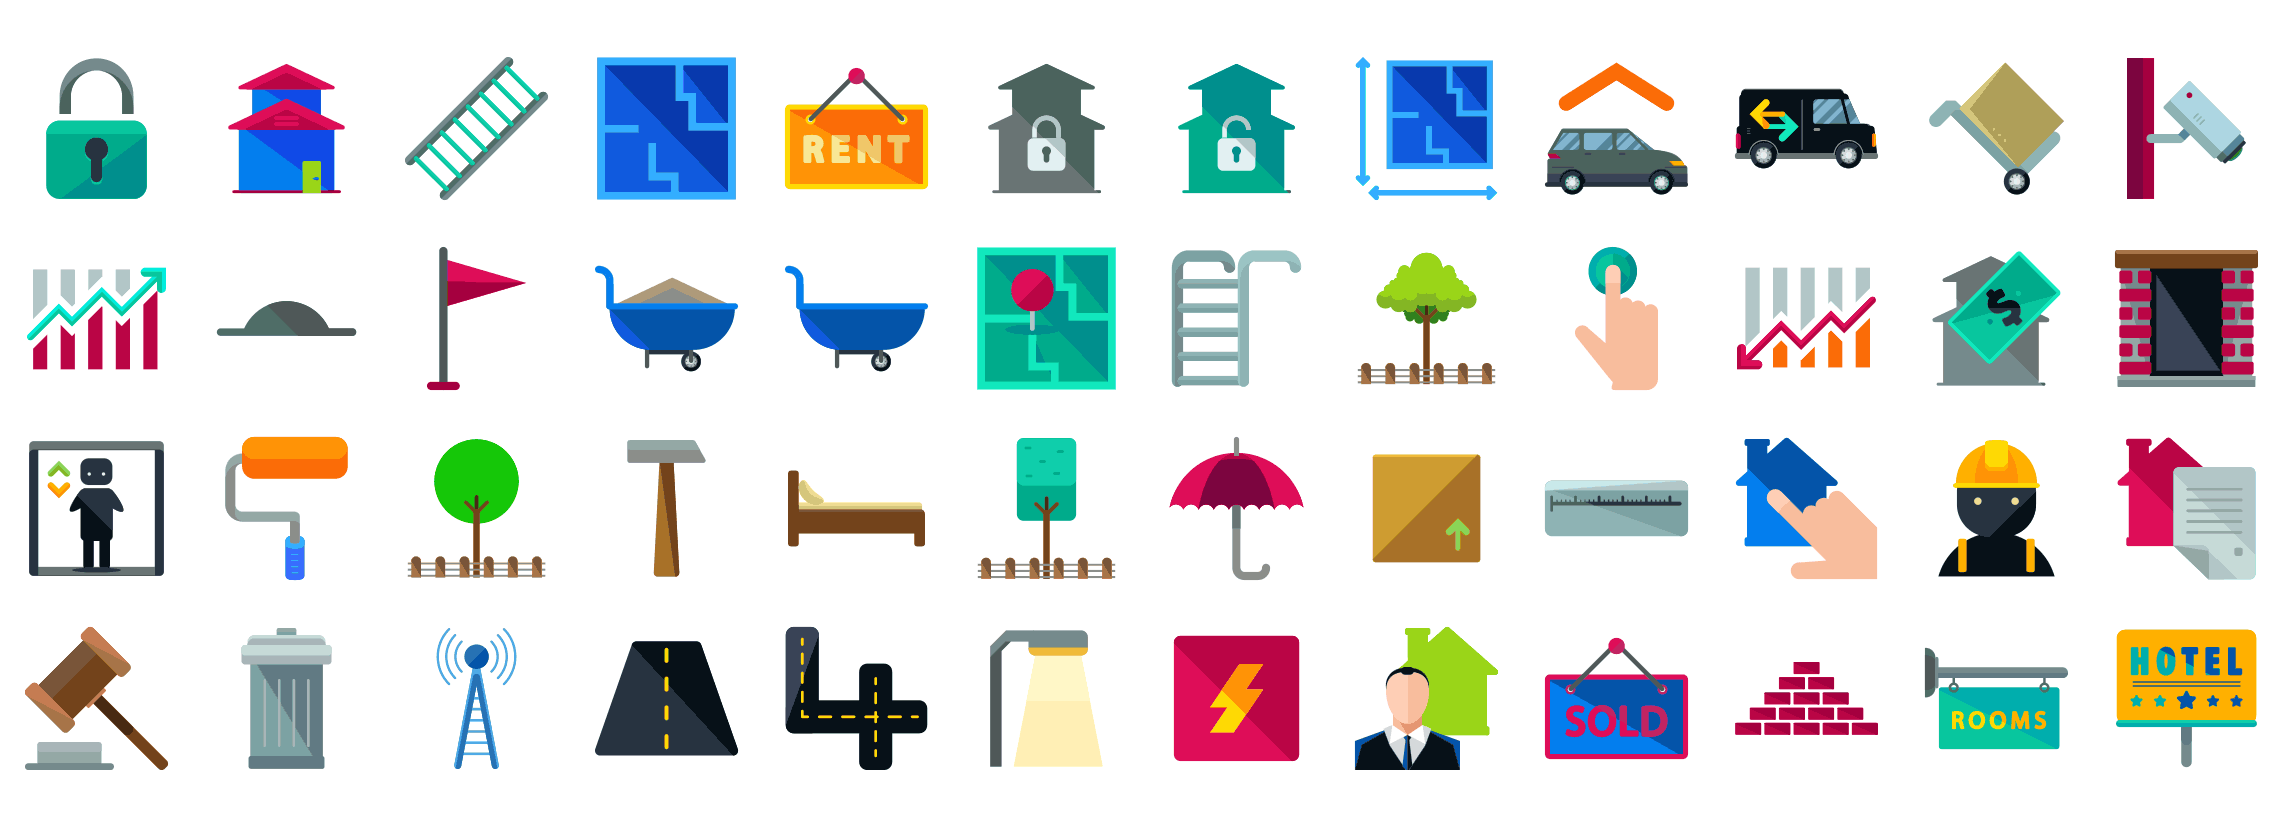 Real-Estate-flat-icons-2